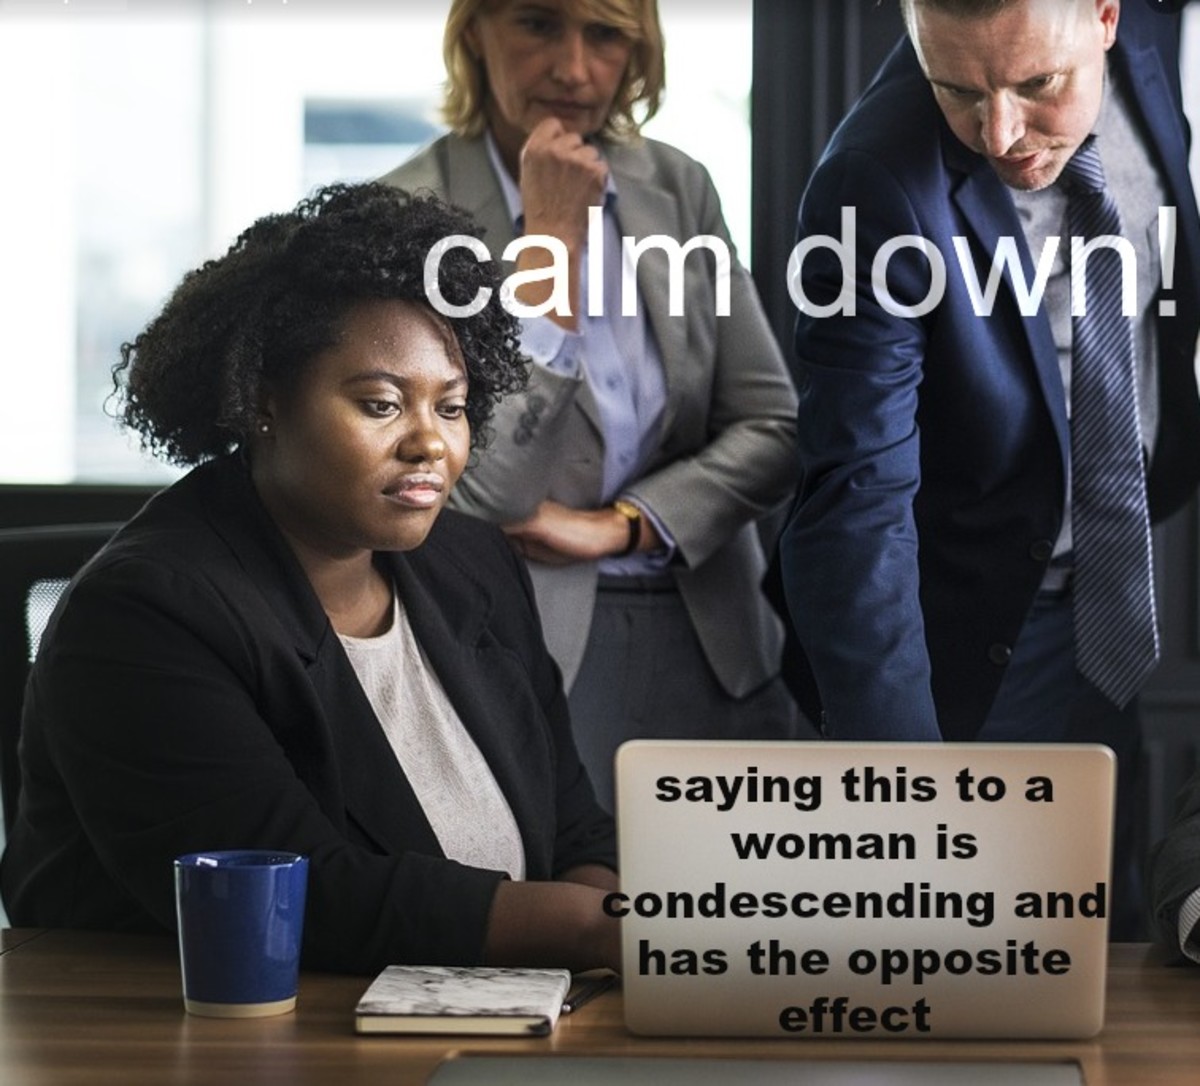 When a man says "calm down," he's manipulating the situation so he's in control.